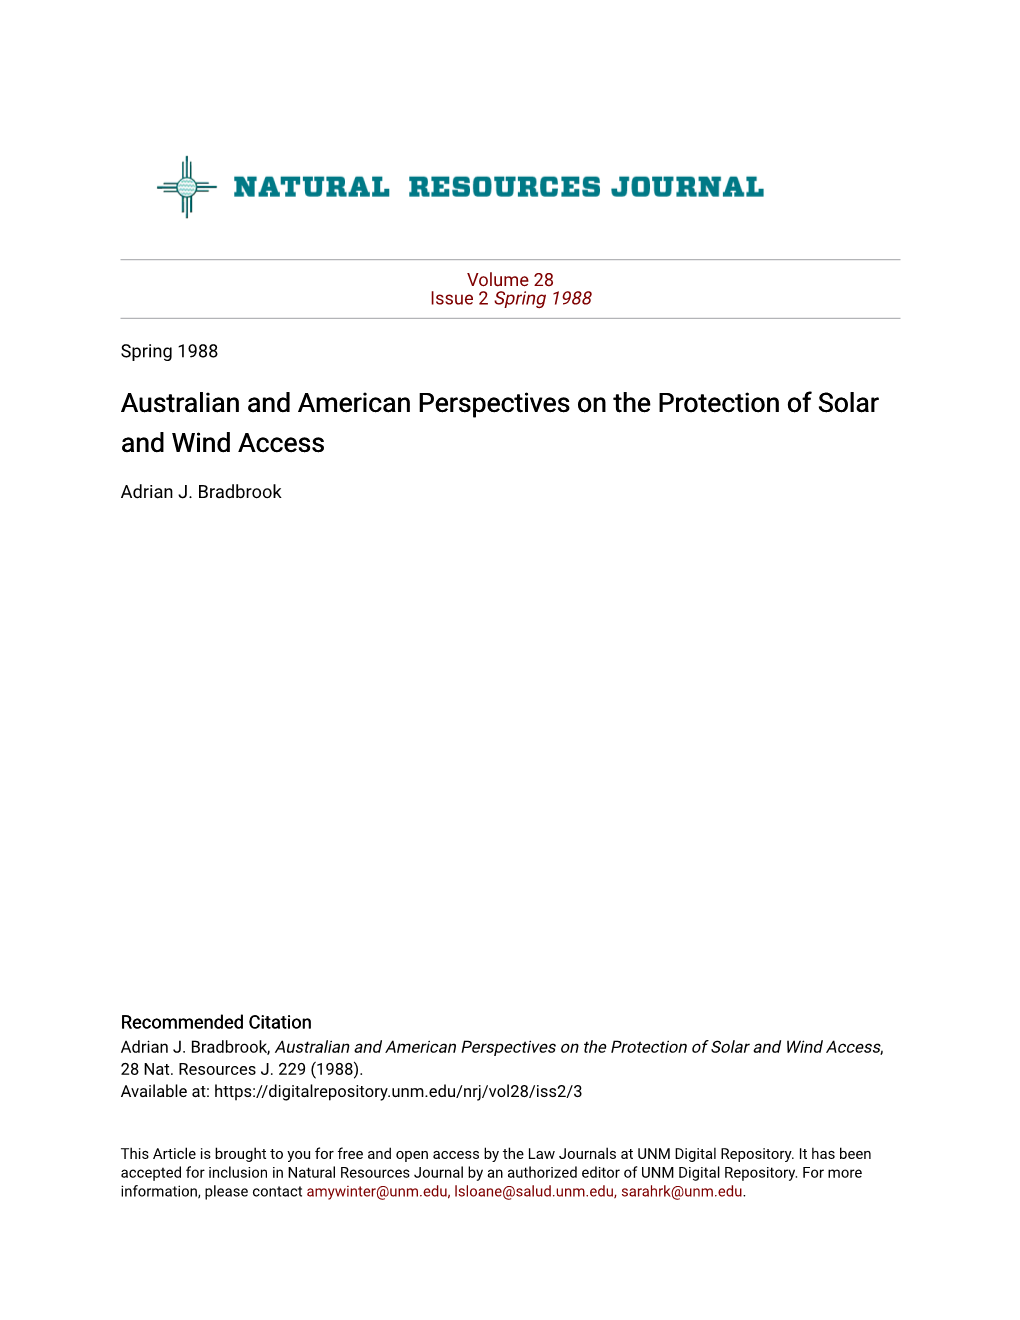 Australian and American Perspectives on the Protection of Solar and Wind Access